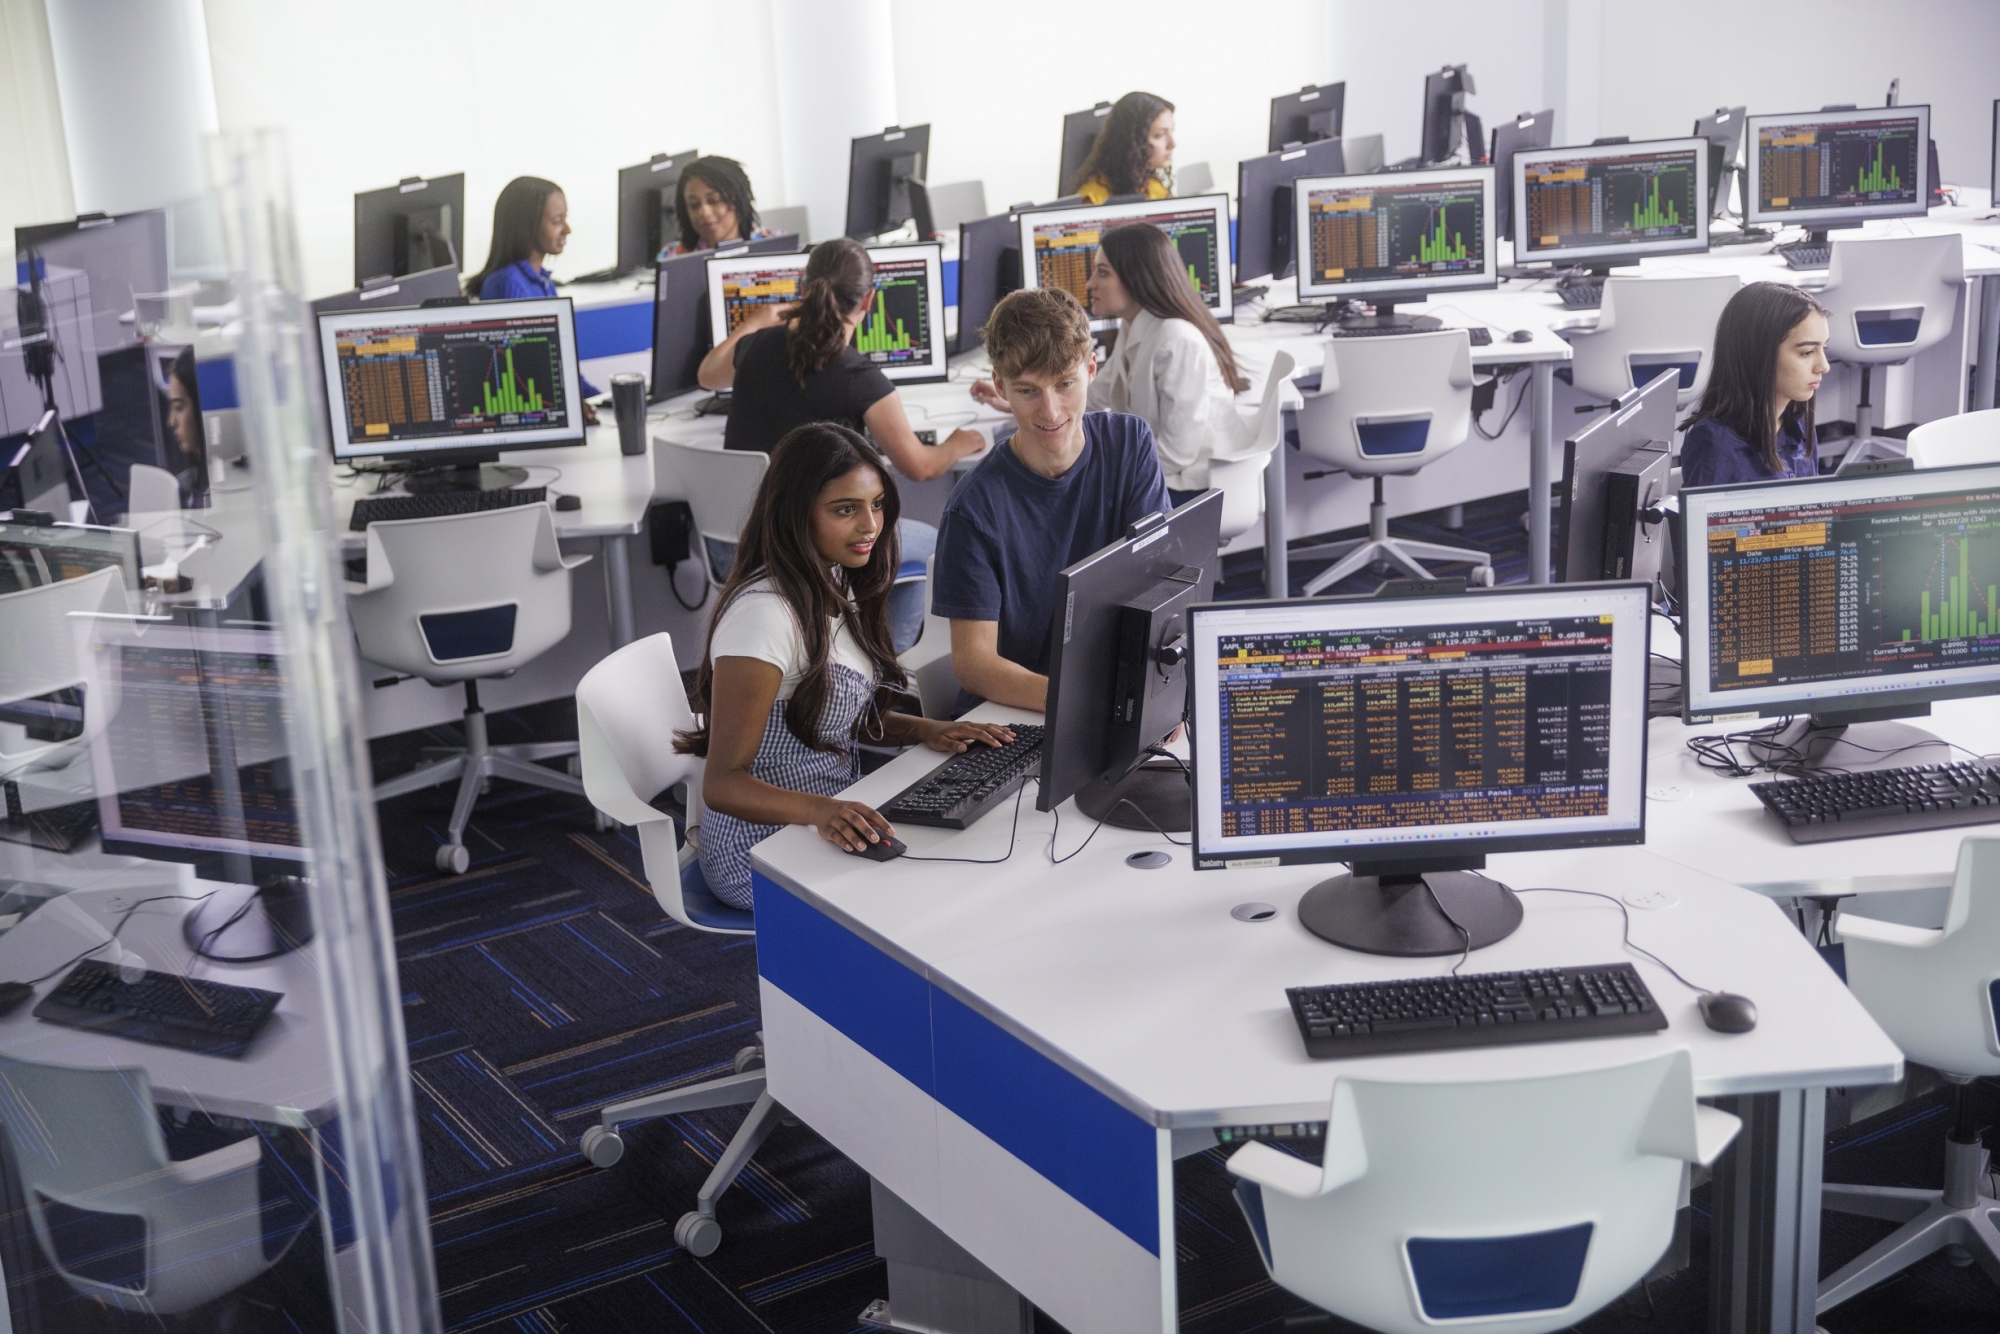 Students at computer stations in the data analytics lab, with graphs up on the screens